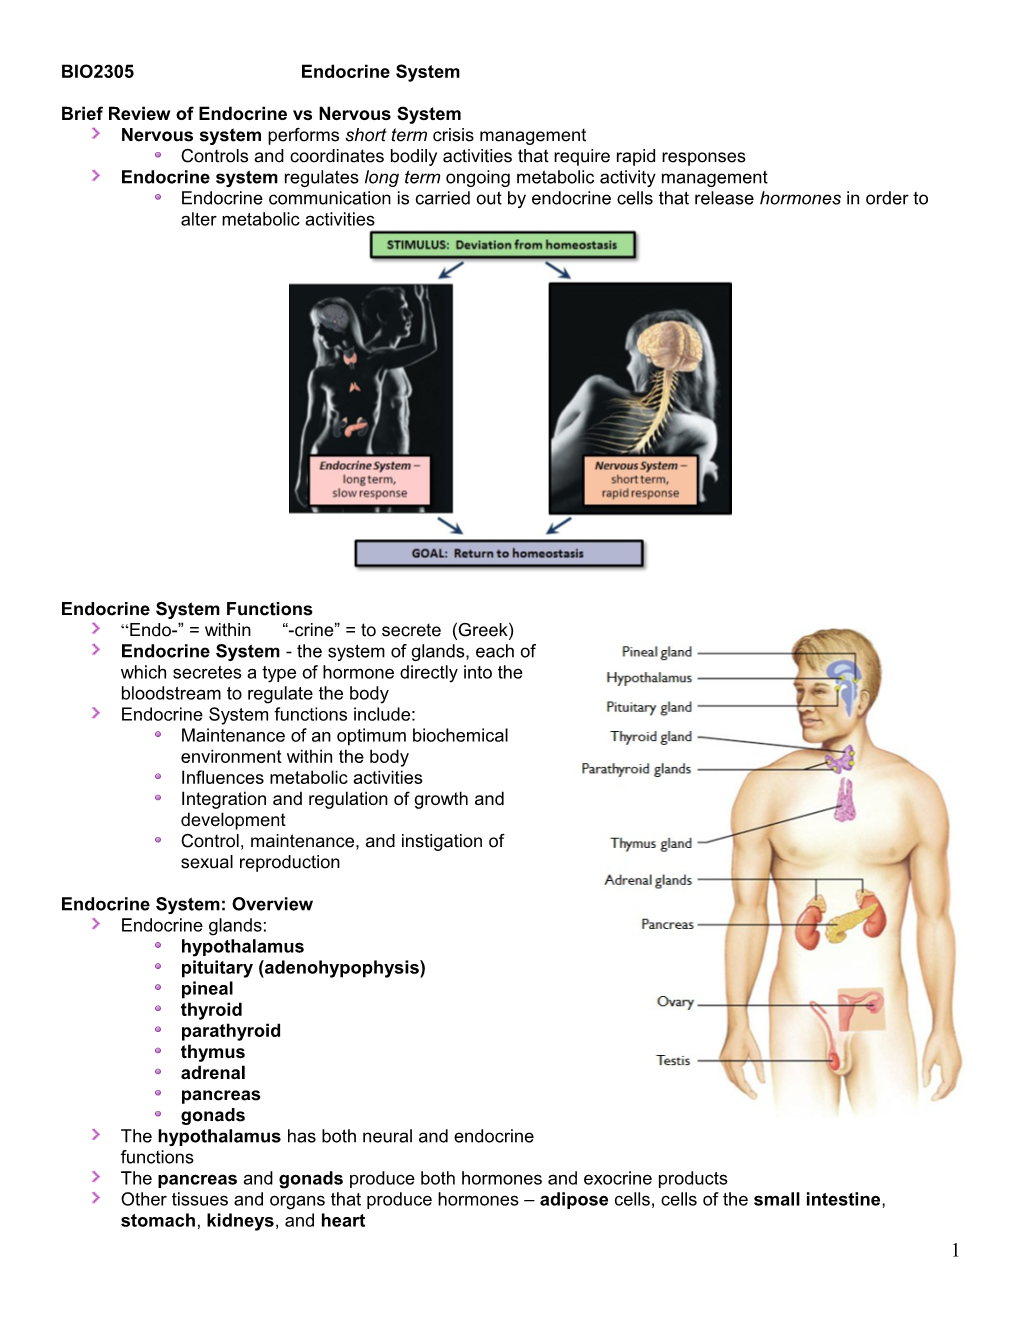 The Endocrine System s1